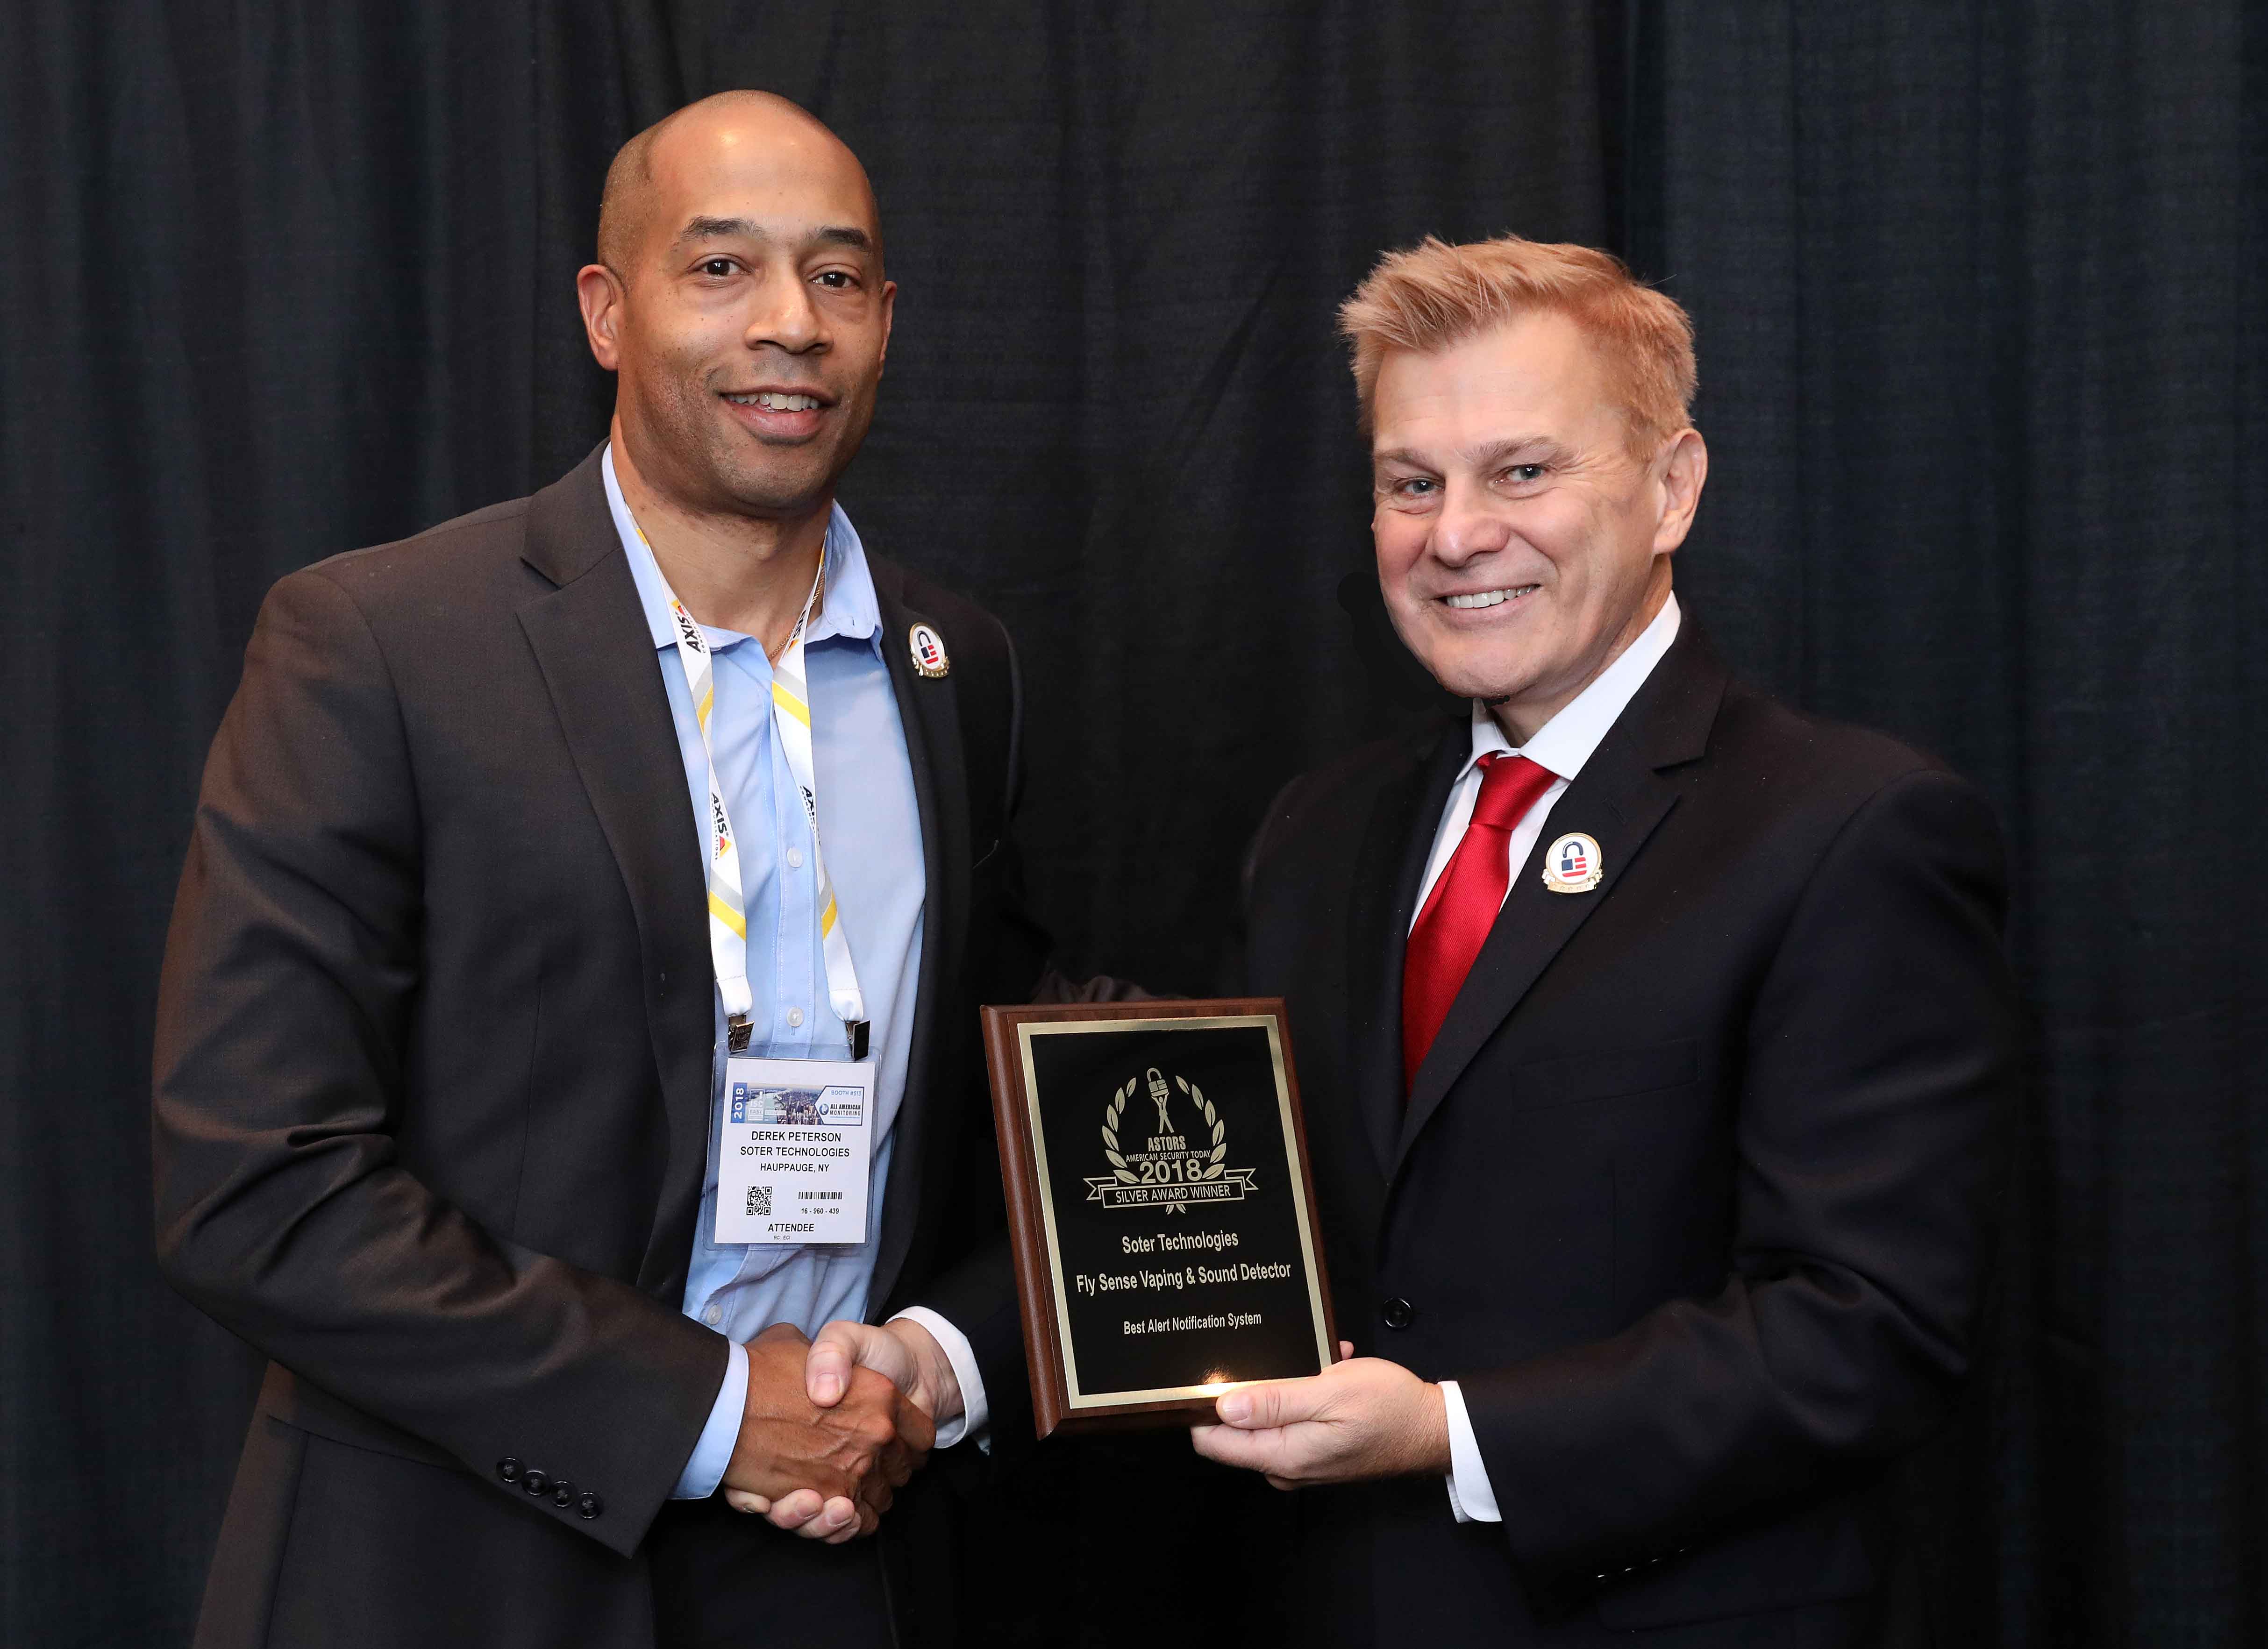 Derek Peterson, CEO, accepting the company's 2018 'ASTORS' Award at ISC East